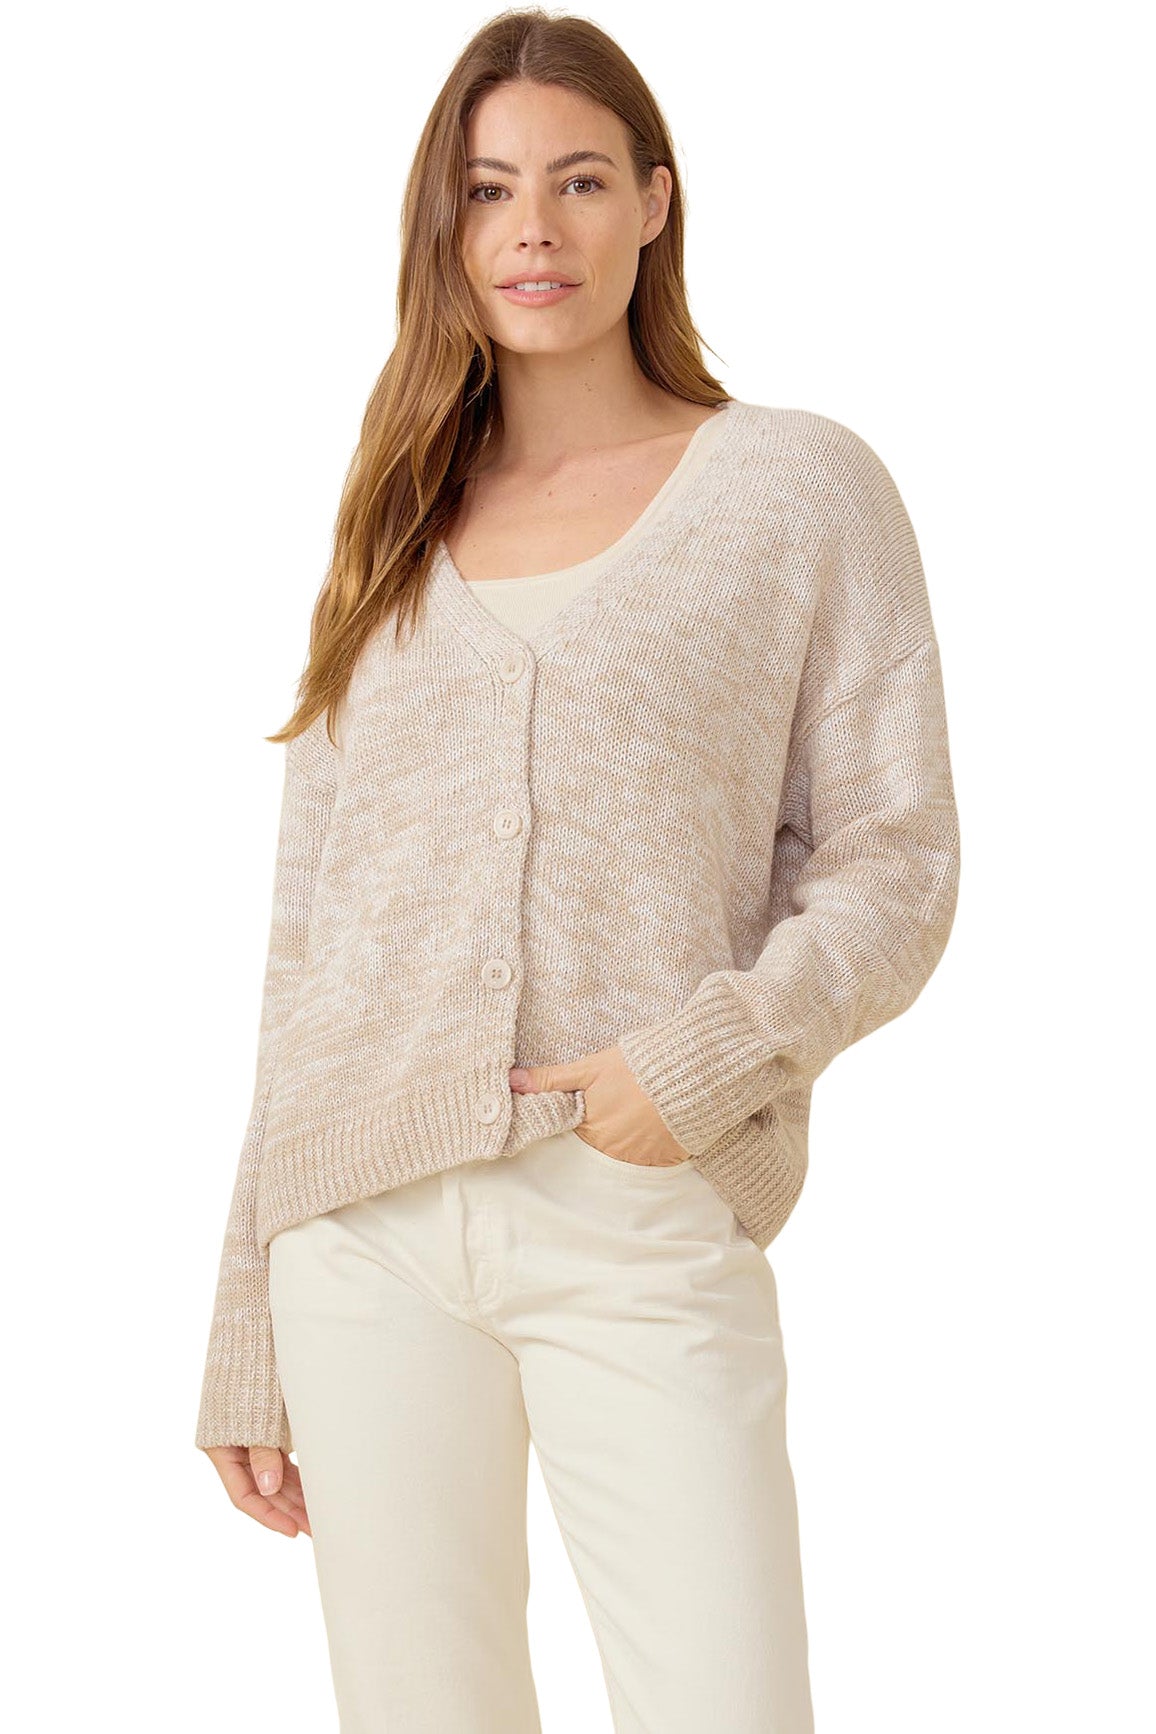 One Grey Day Victoria Cardigan in Ivory Combo